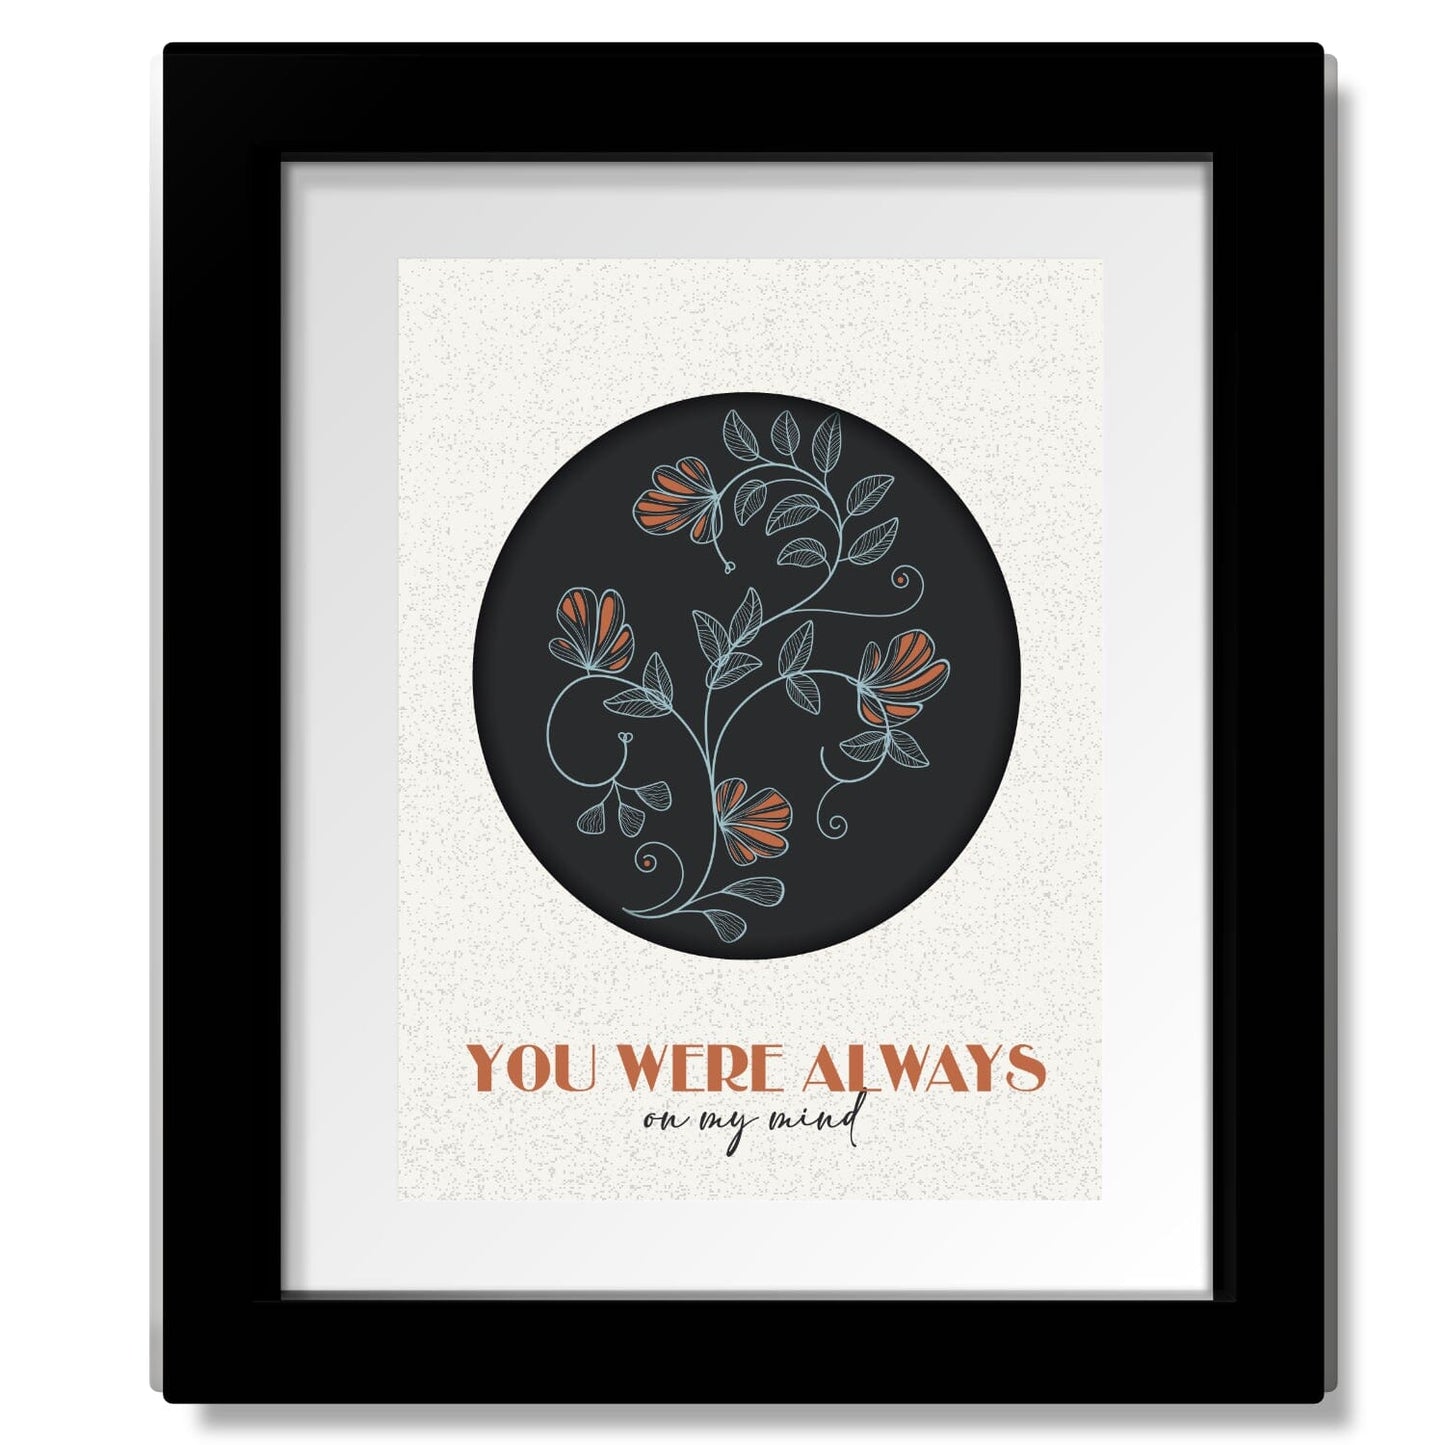 You Were Always on my Mind by Willie Nelson - Song Lyric Art Song Lyrics Art Song Lyrics Art 8x10 Matted and Framed Print 